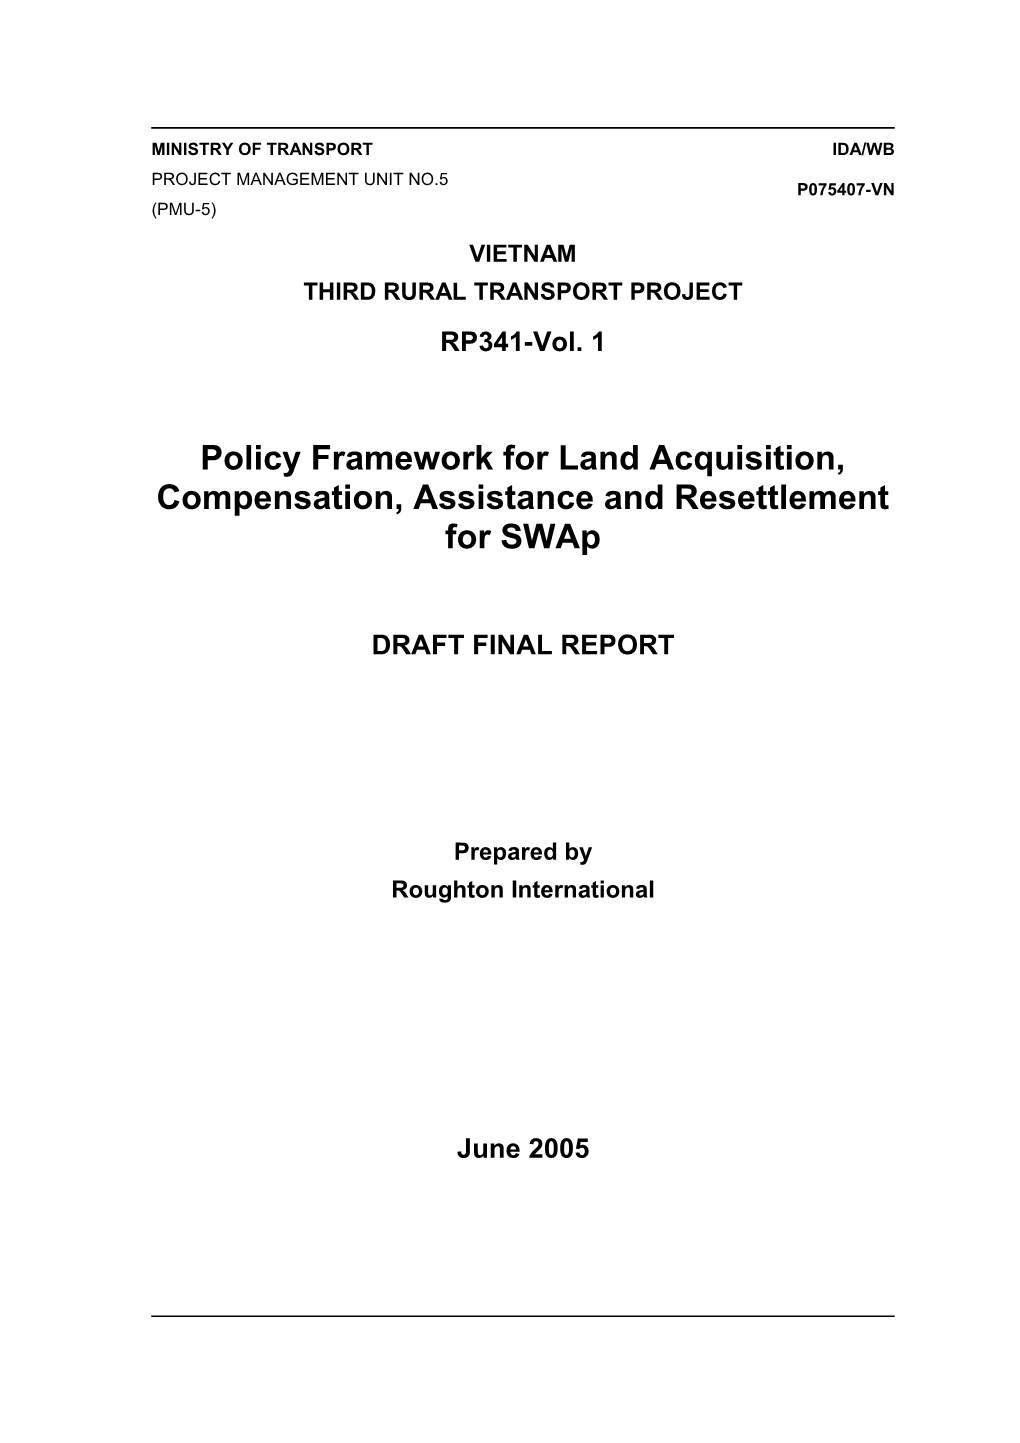 Policy Framework for Land Acquisition, Compensation, Assistance and Resettlement s1